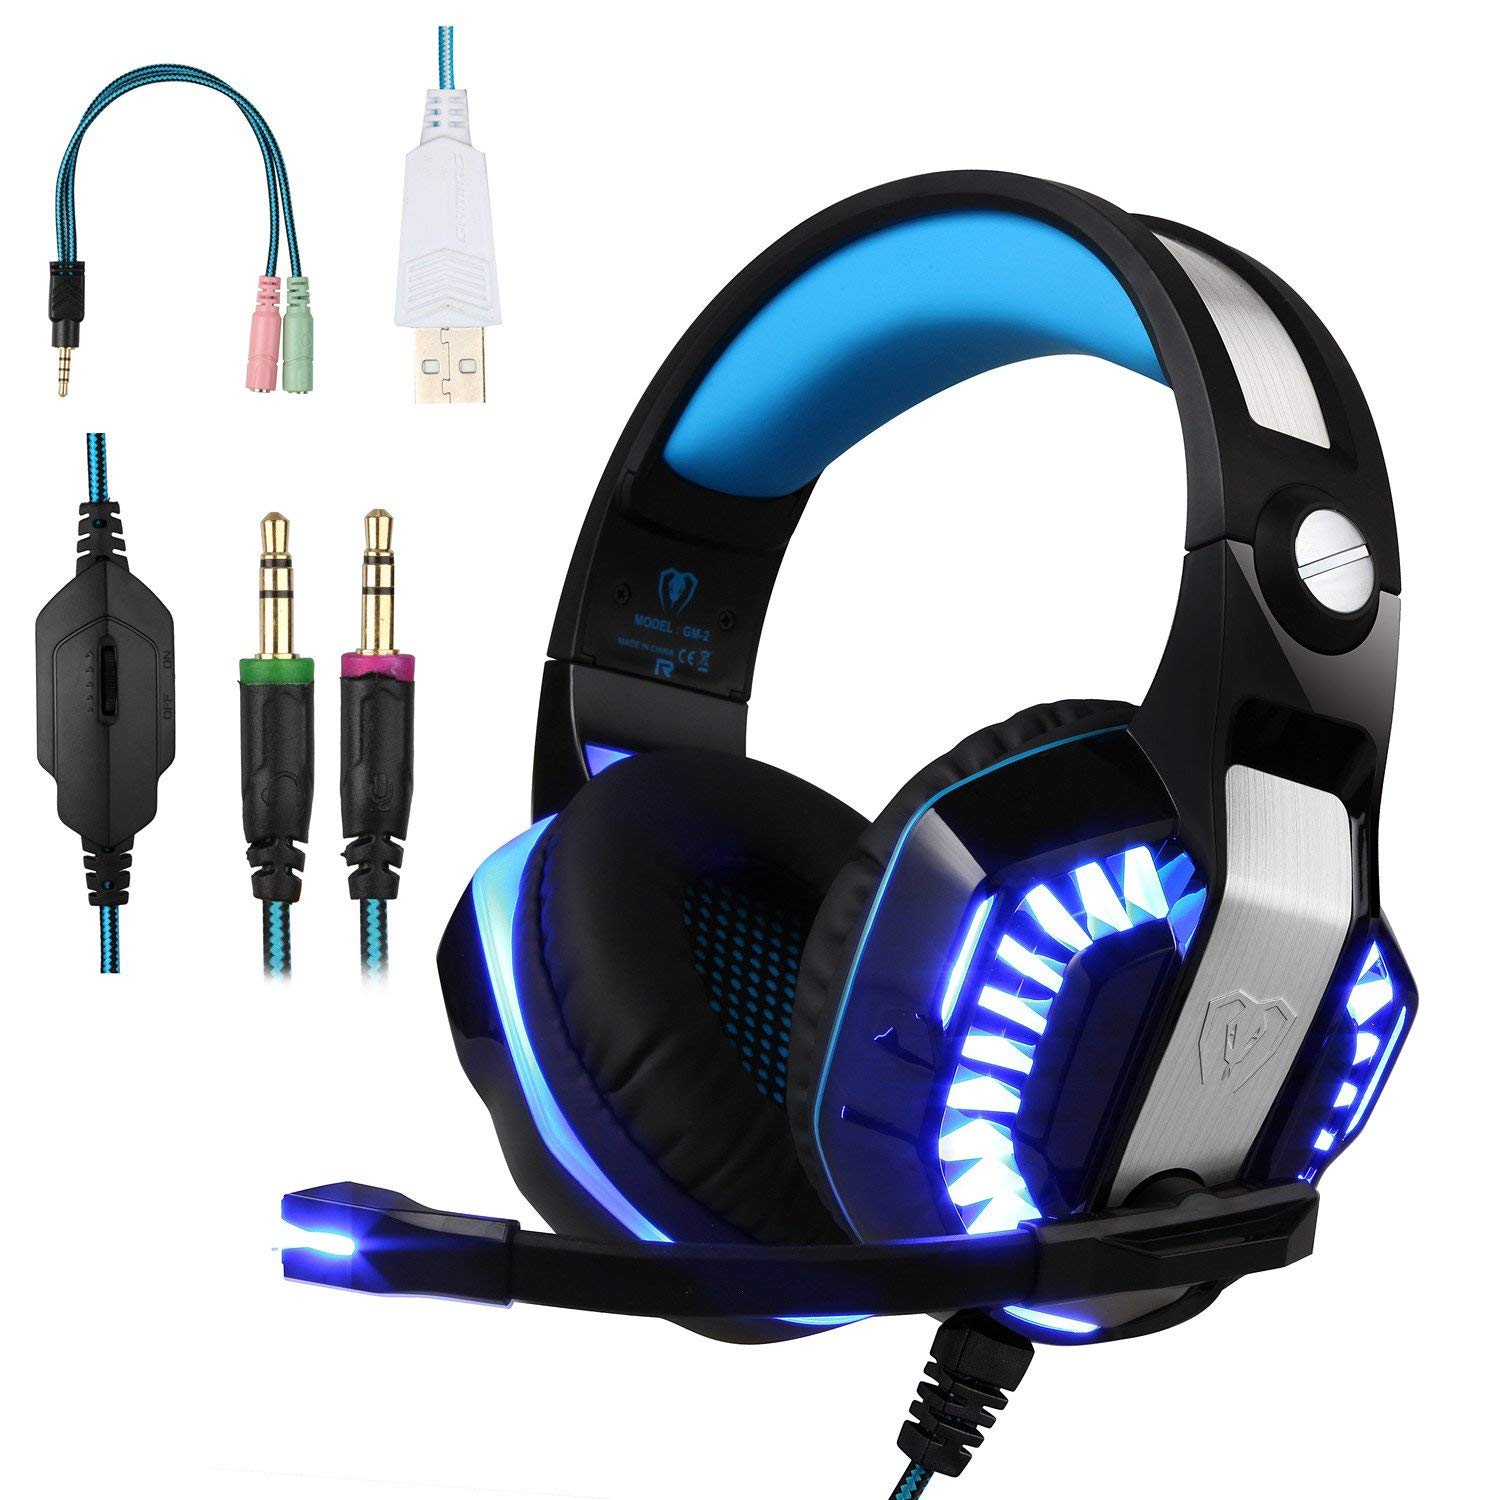 Stereo Gaming Headset for PS4;Over-Ear Headphones with Mic and LED Lights for PlayStation 4;Laptop;PC;Smartphones